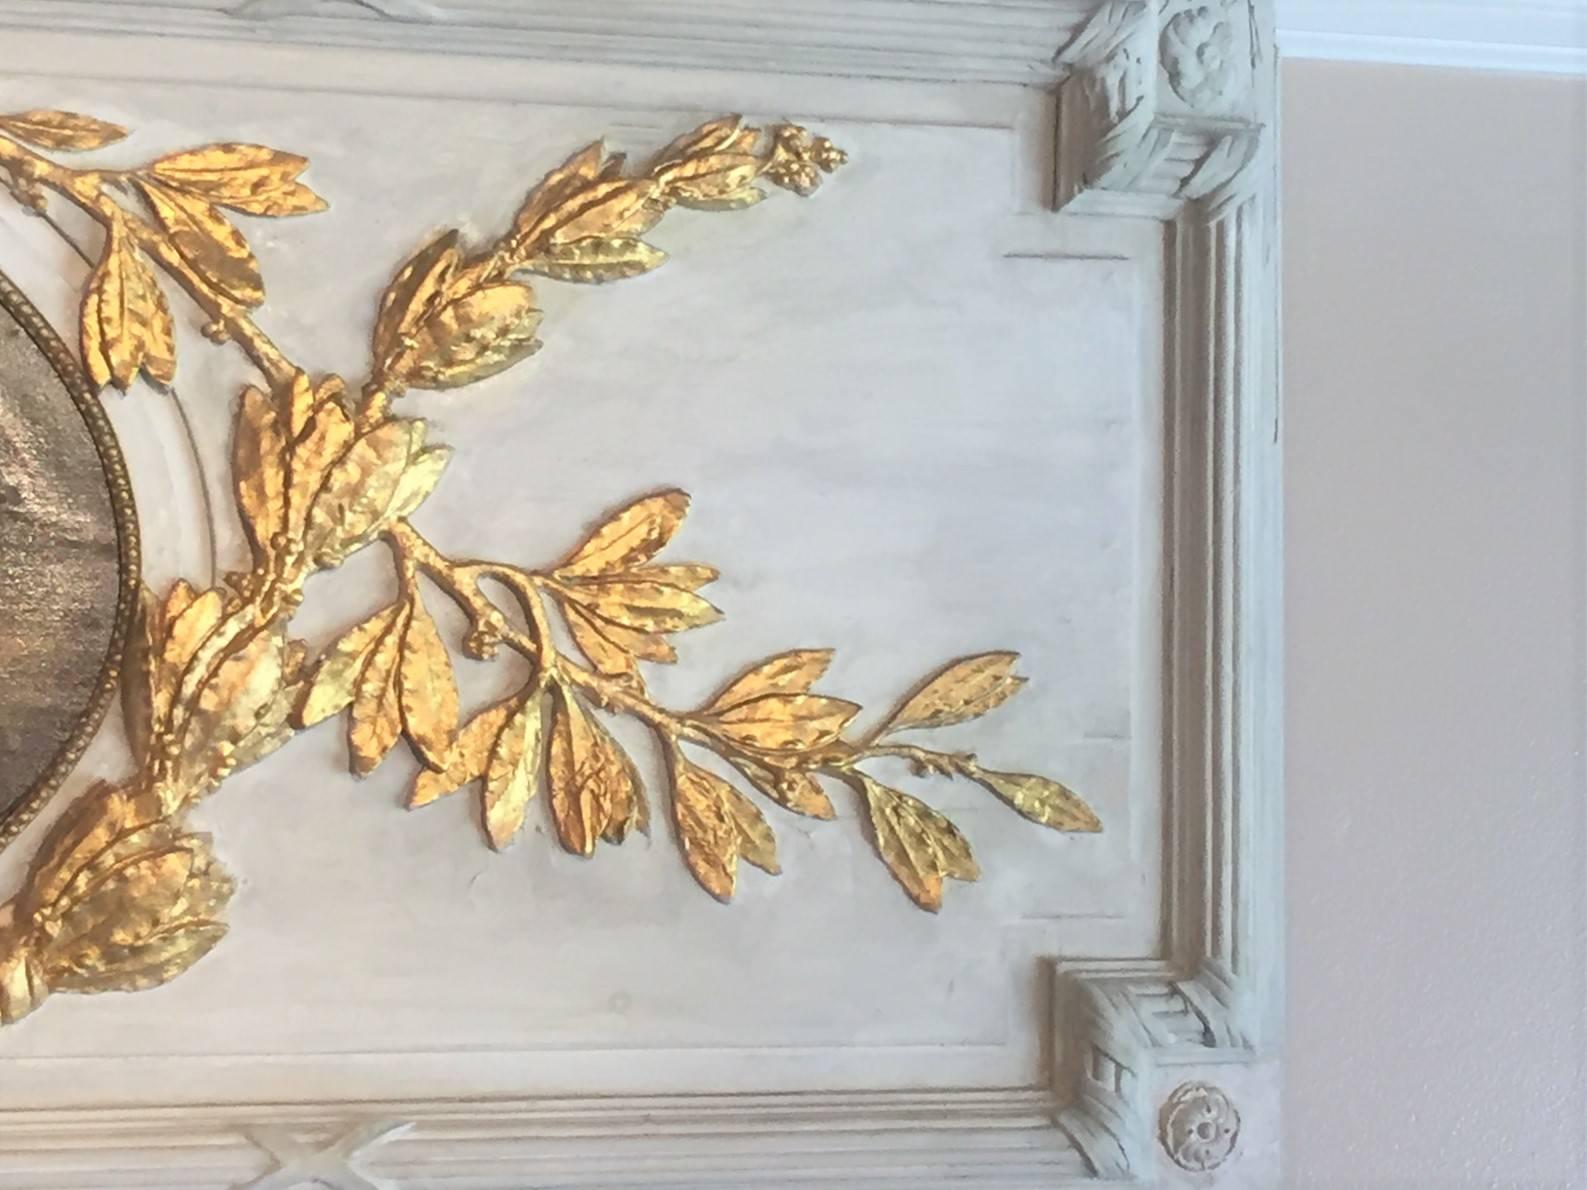 Wood Carved Giltwood and Painted Boiserie Overdoor Frieze Panel with Cherubs Inset